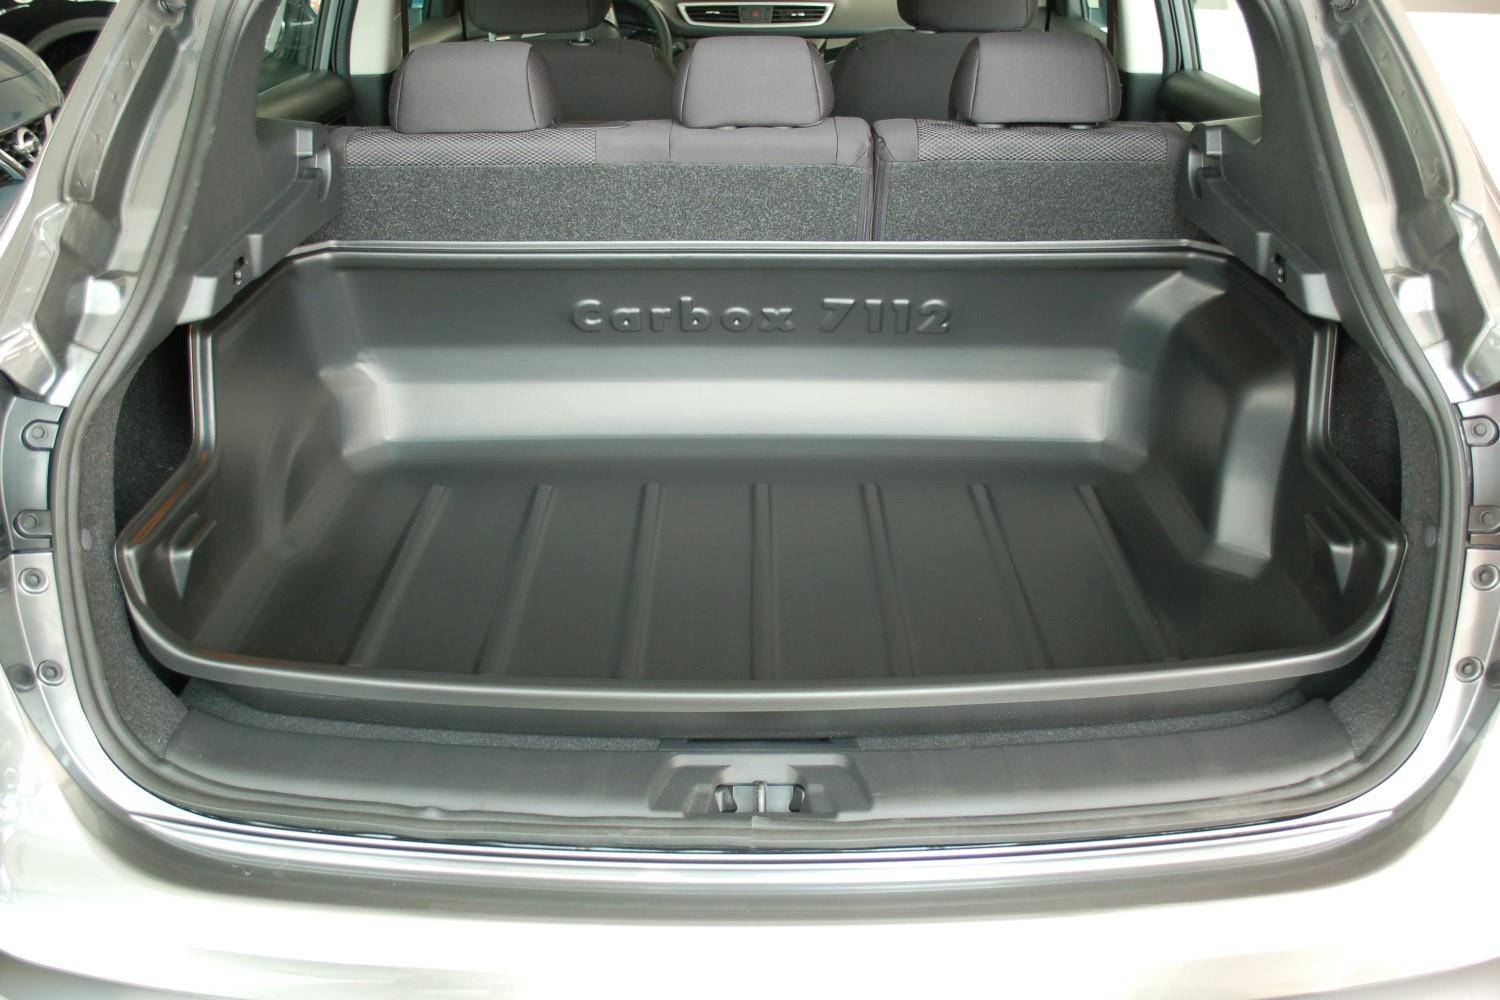 https://www.carparts-expert.com/images/stories/virtuemart/product/nis3qacc-nissan-qashqai-j11-2013-carbox-classic-high-sided-boot-liner-1.jpg